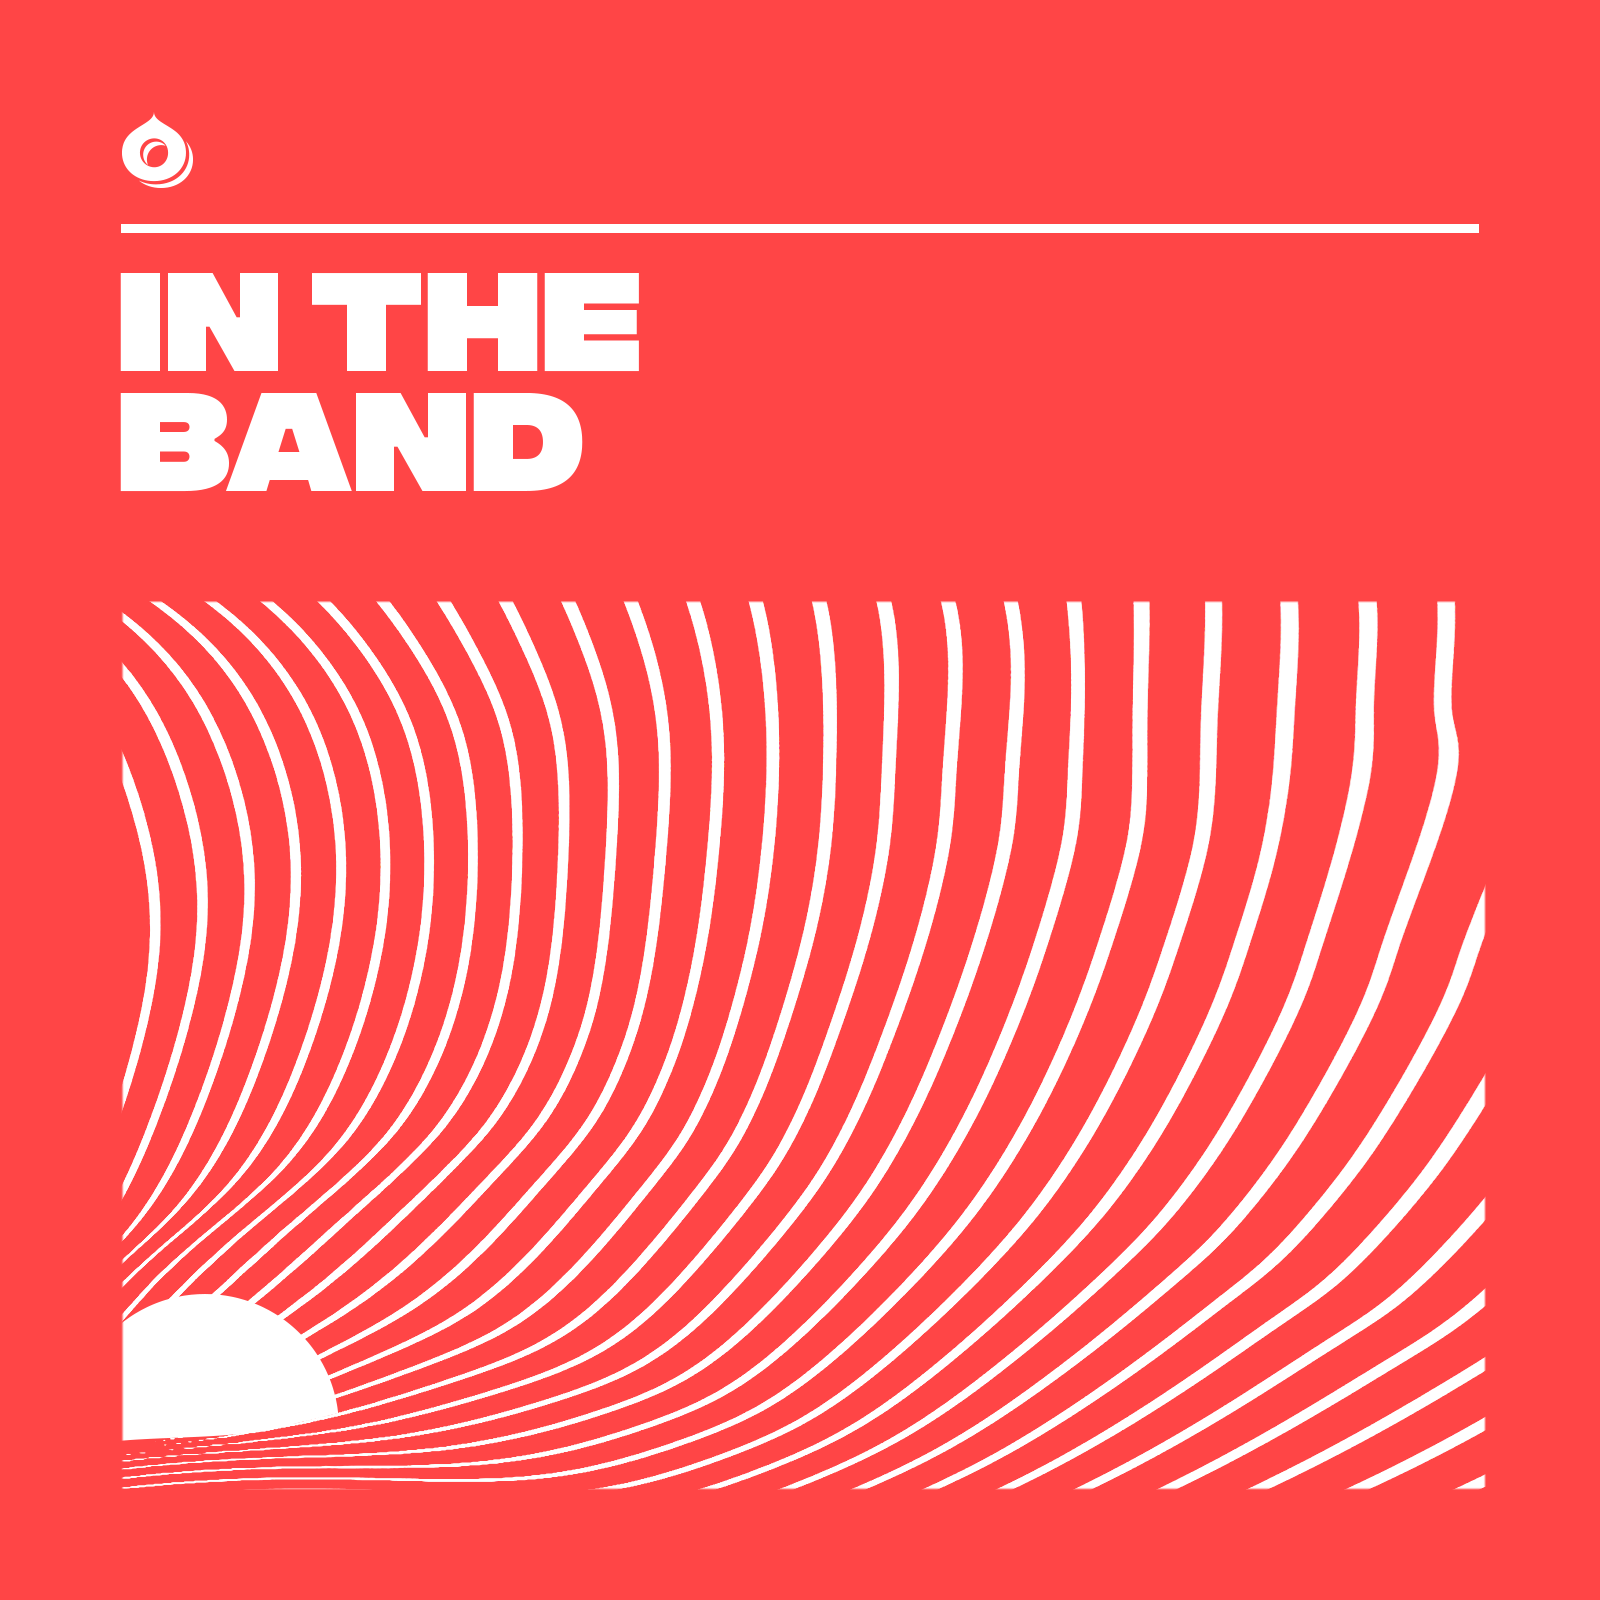 9 _ IN THE BAND